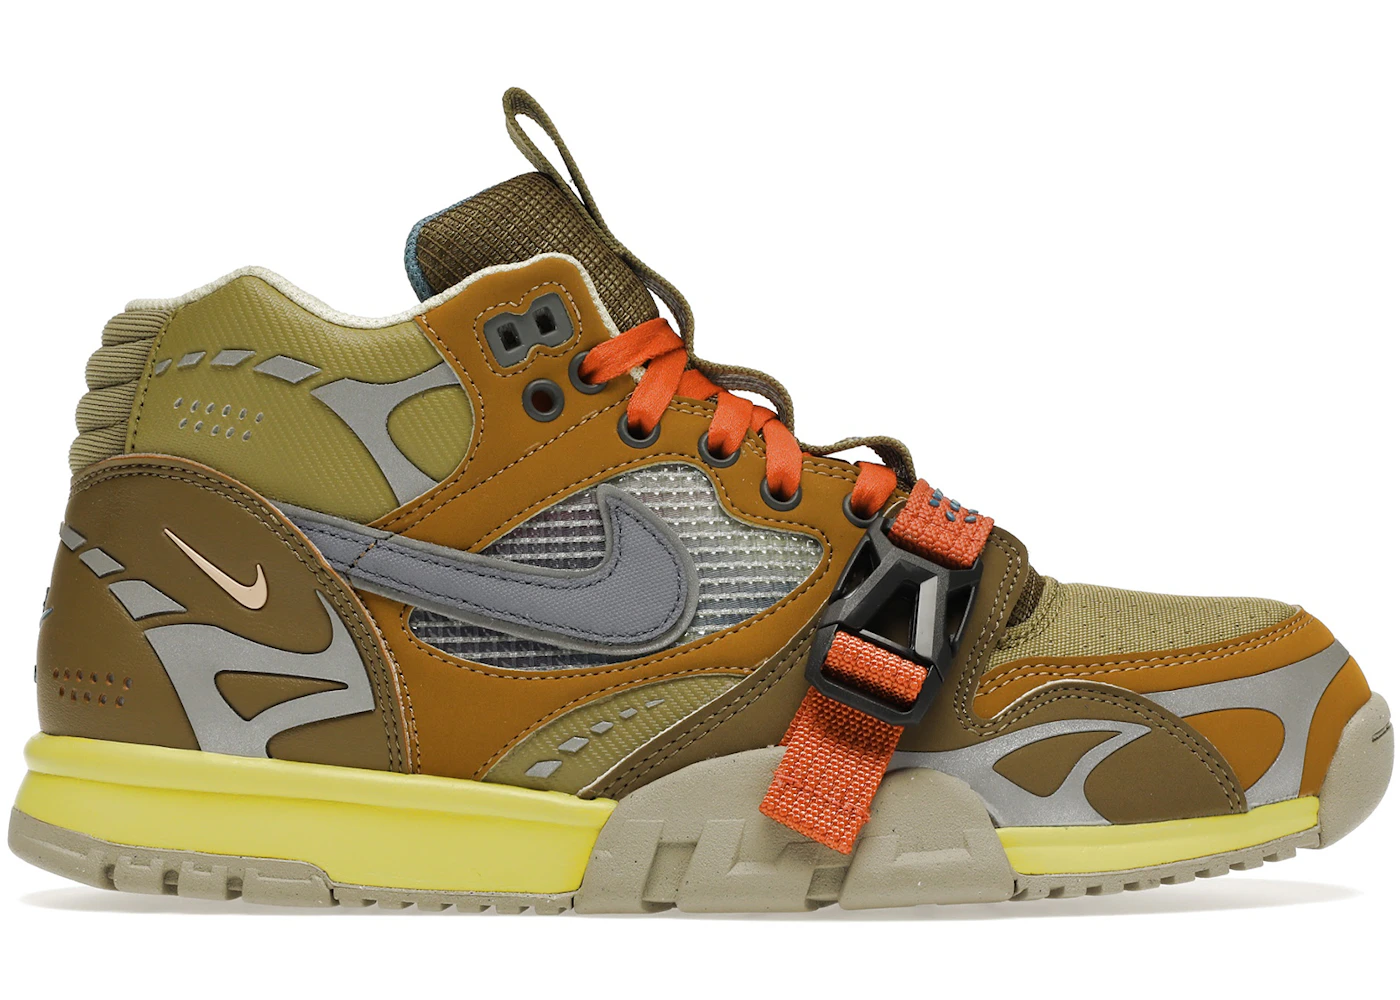 compact sort Make a bed Nike Air Trainer 1 SP Coriander - DH7338-300 - US